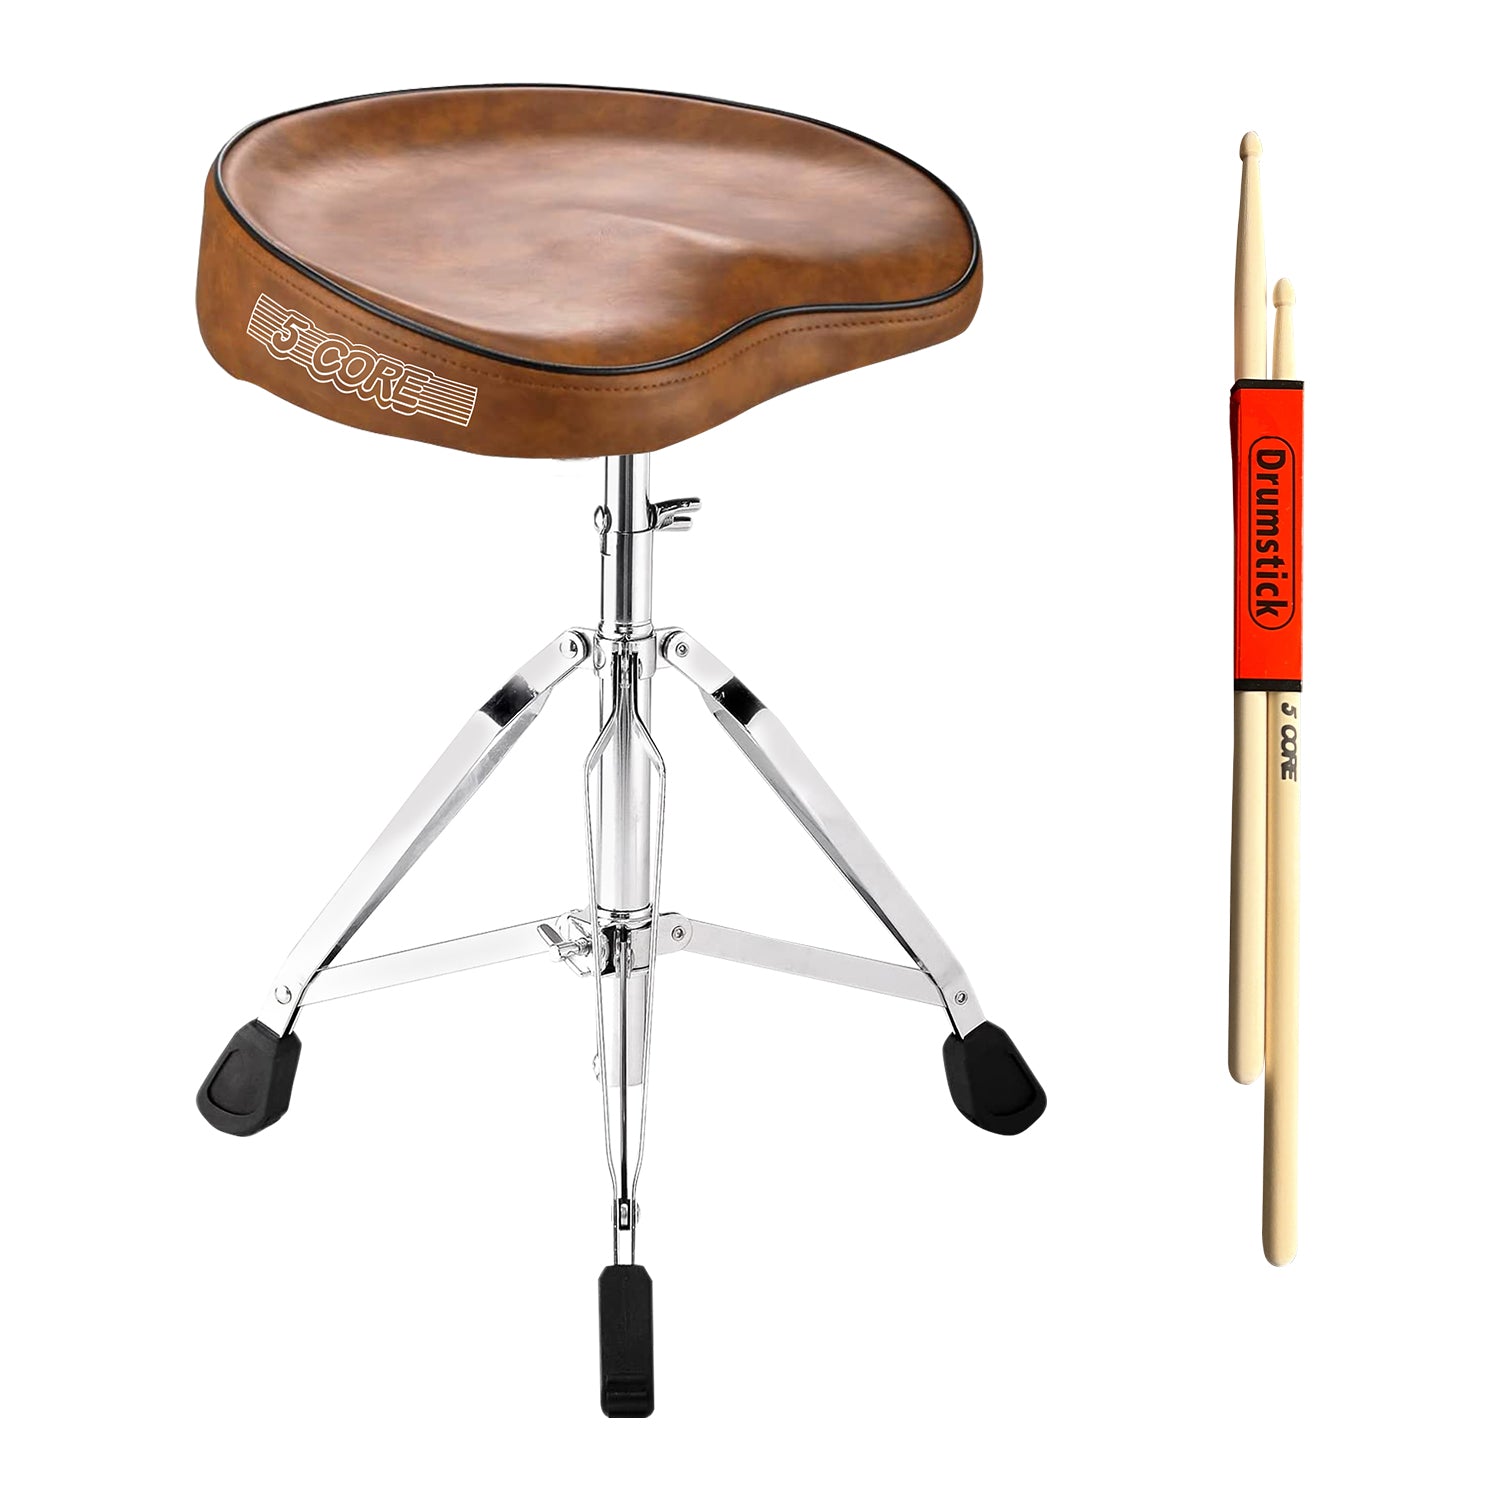 5 CORE Drum Throne Thick Padded Comfortable Guitar Stool with Memory Foam Adjustable Brown Drum Stool